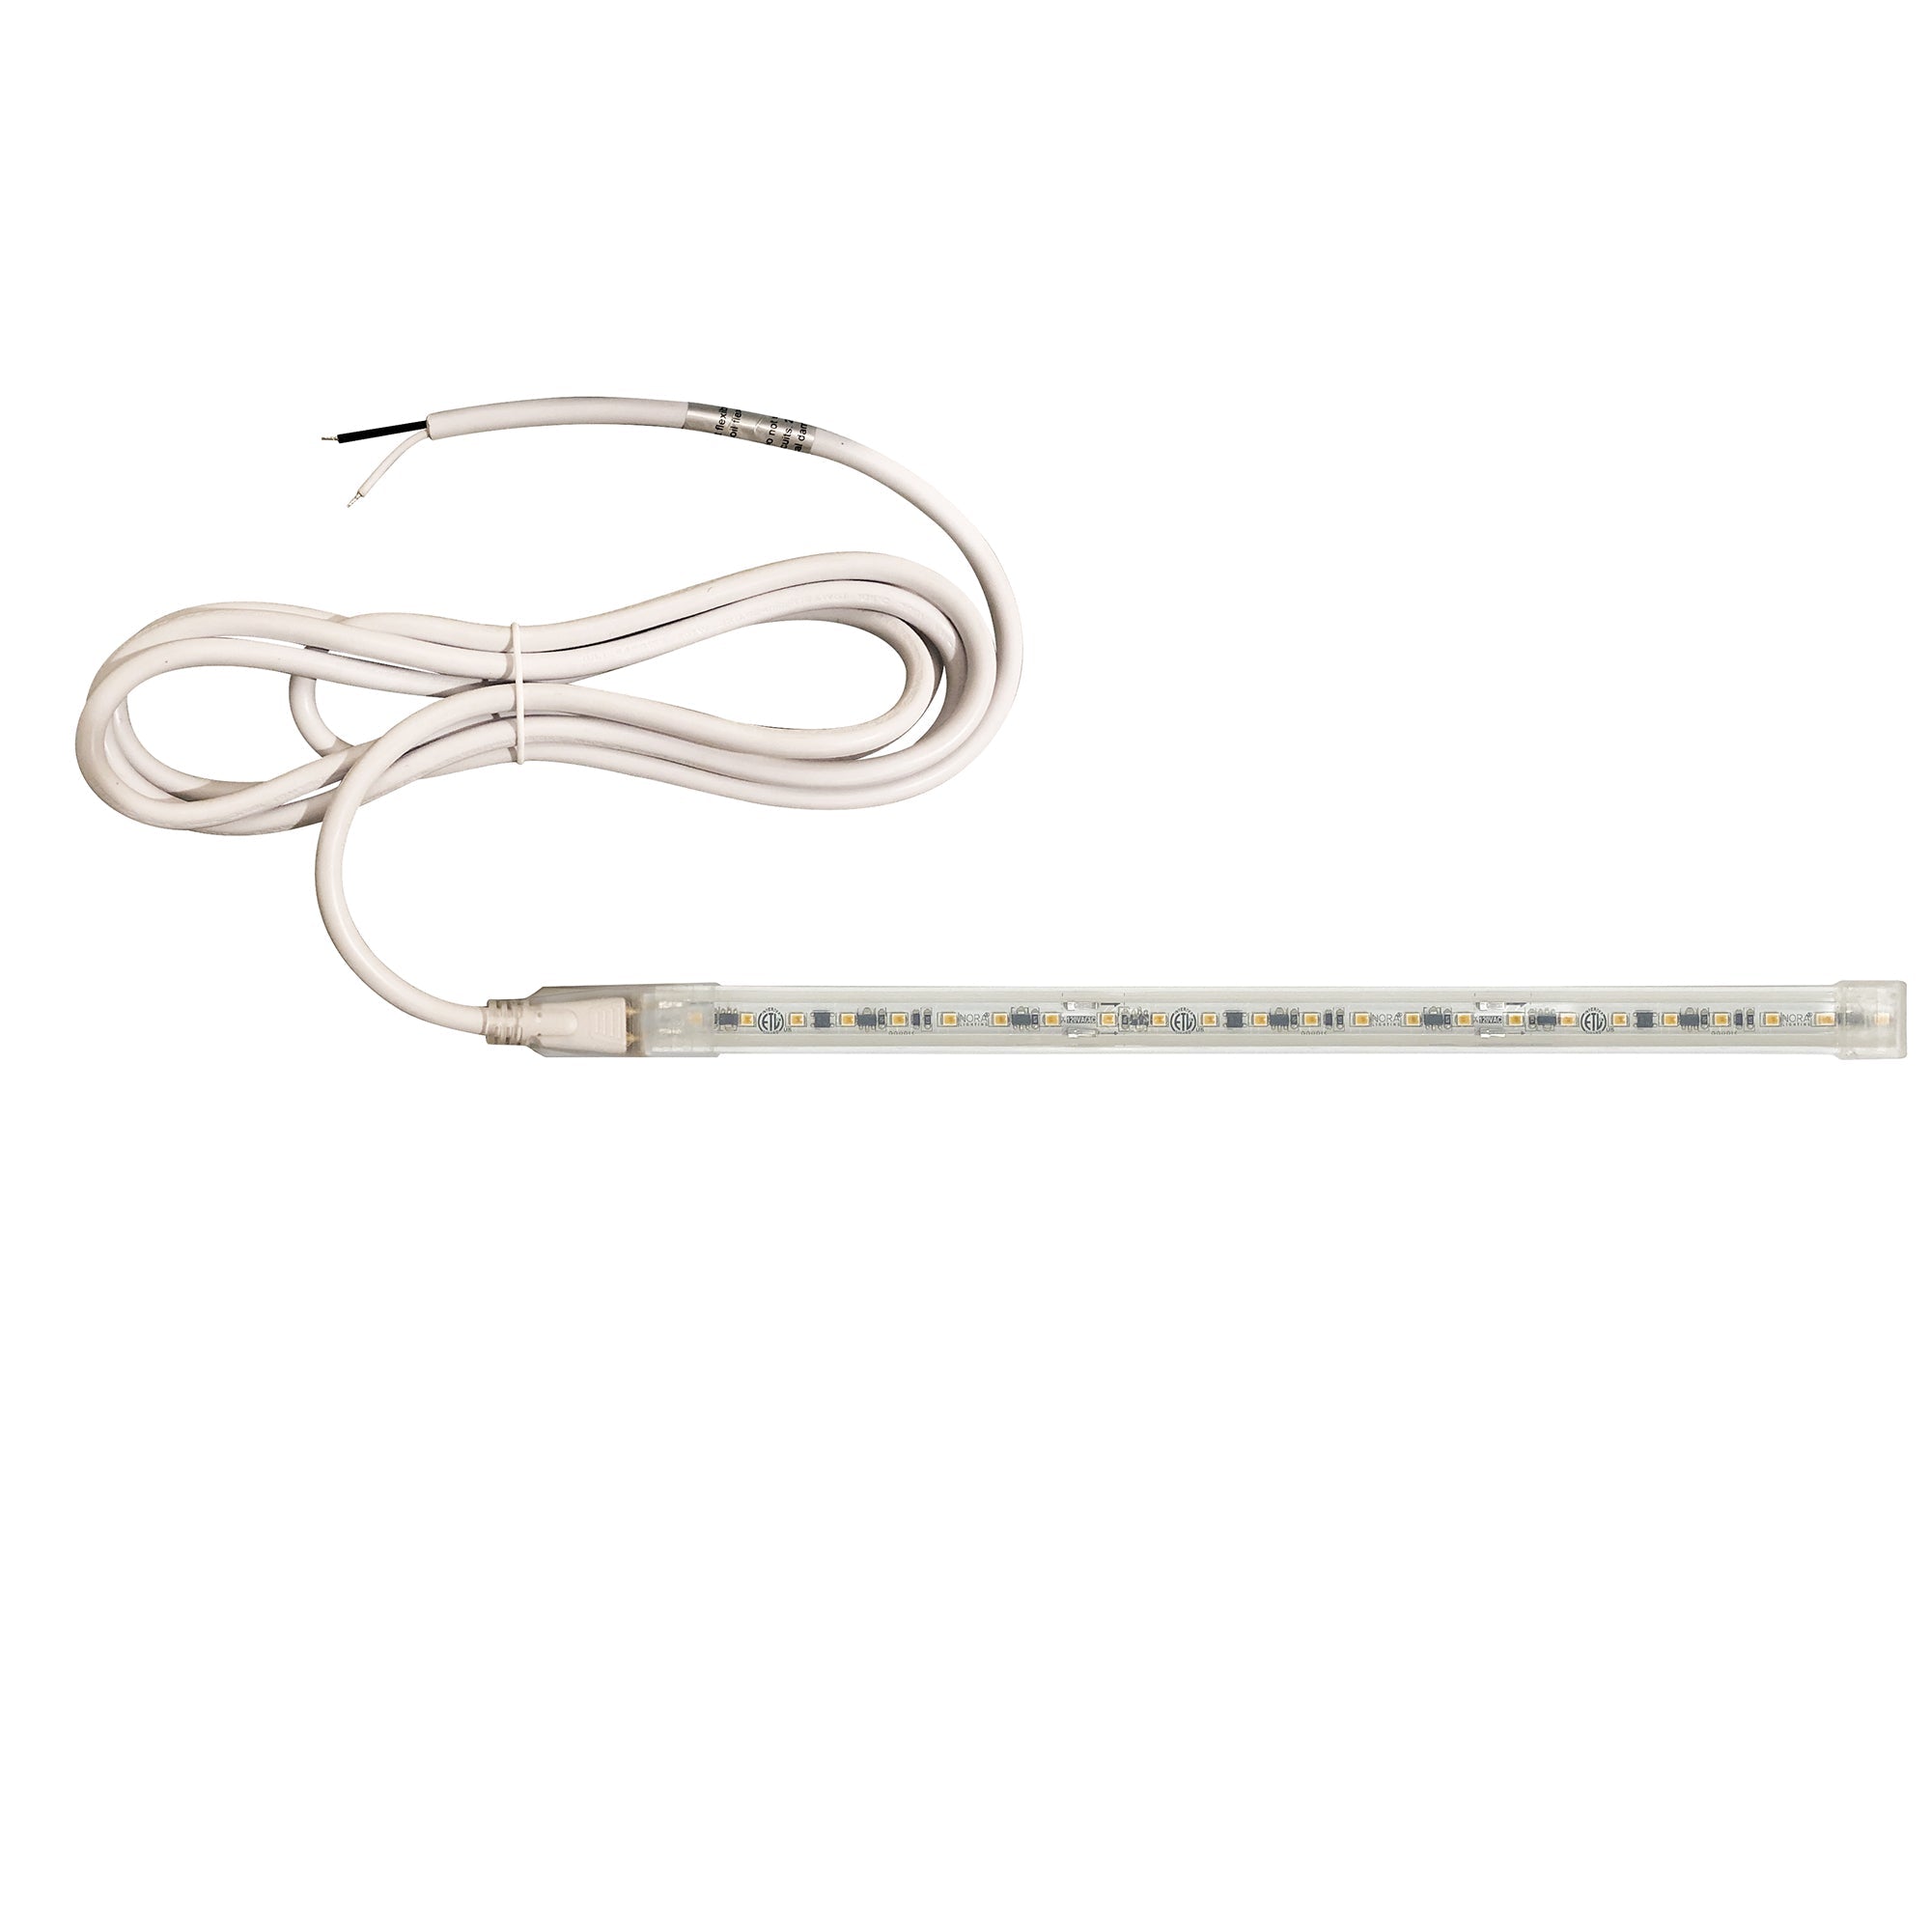 Nora Lighting NUTP13-W78-12-930/HW - Accent / Undercabinet - Custom Cut 78-ft 120V Continuous LED Tape Light, 330lm / 3.6W per foot, 3000K, w/ Mounting Clips and 8' Hardwired Power Cord